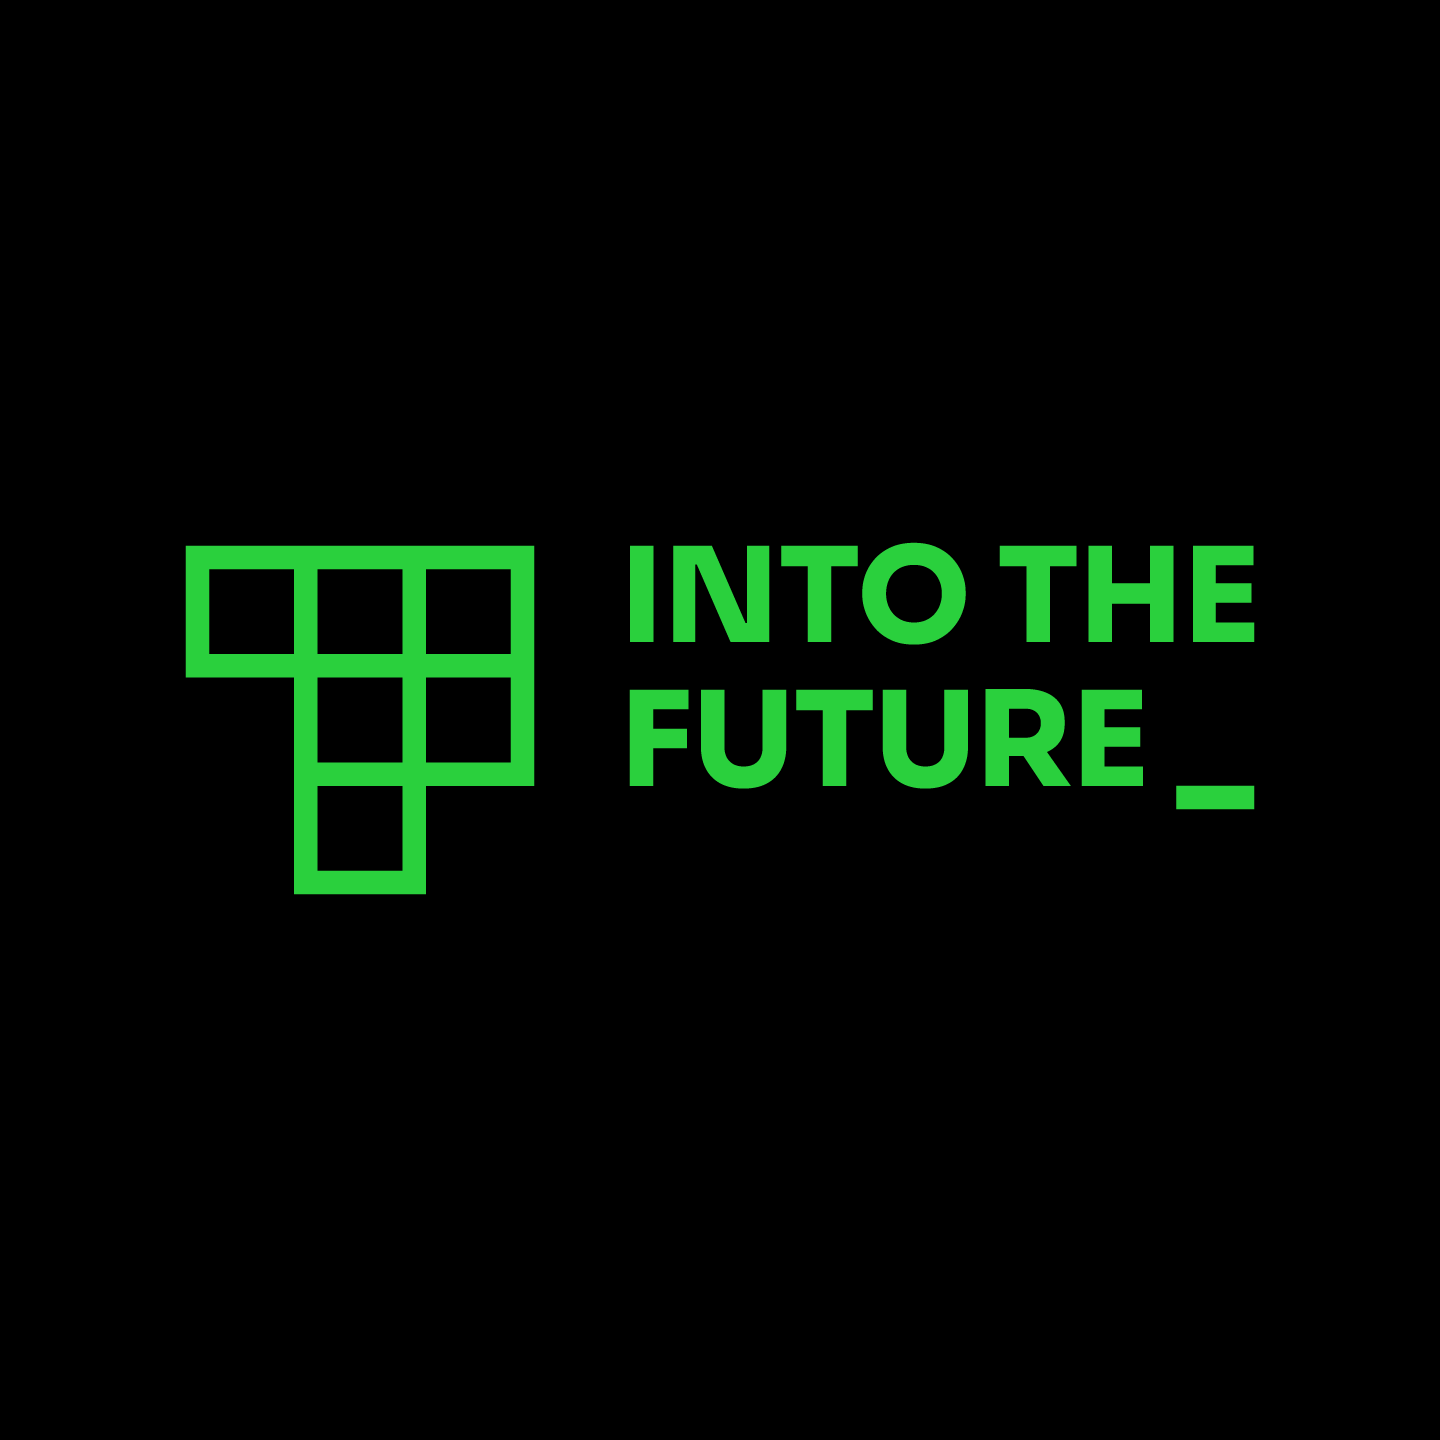 Into The Future logo, in green on black.